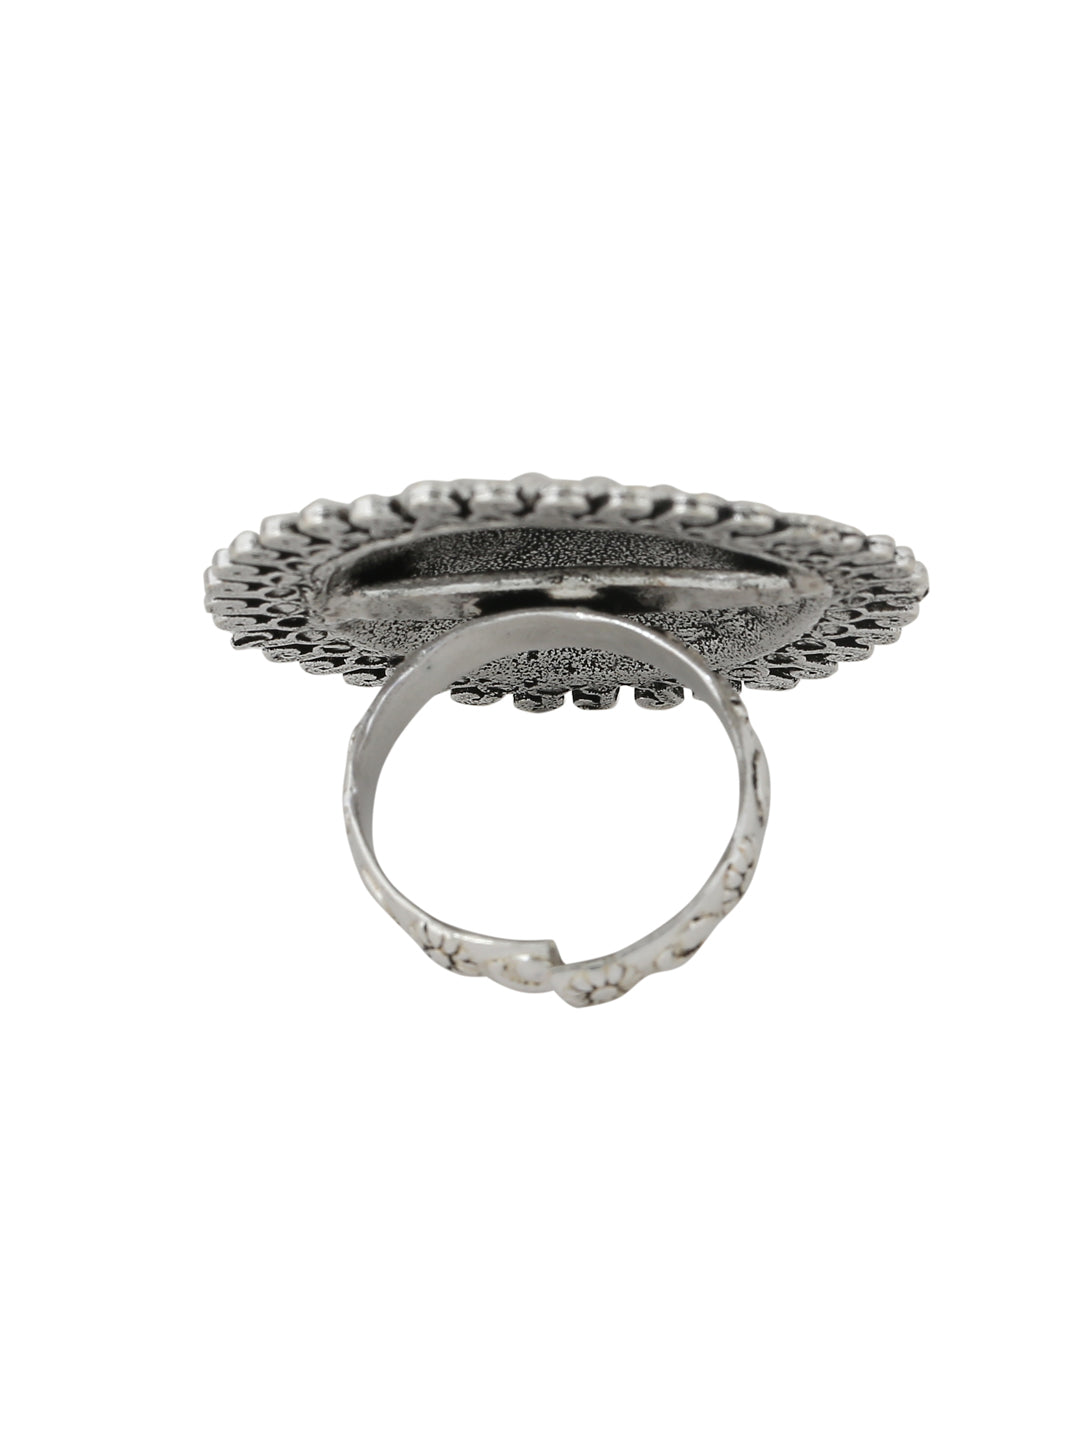 Women's Oxidised Silver Plated Adjustable Finger Ring - NVR